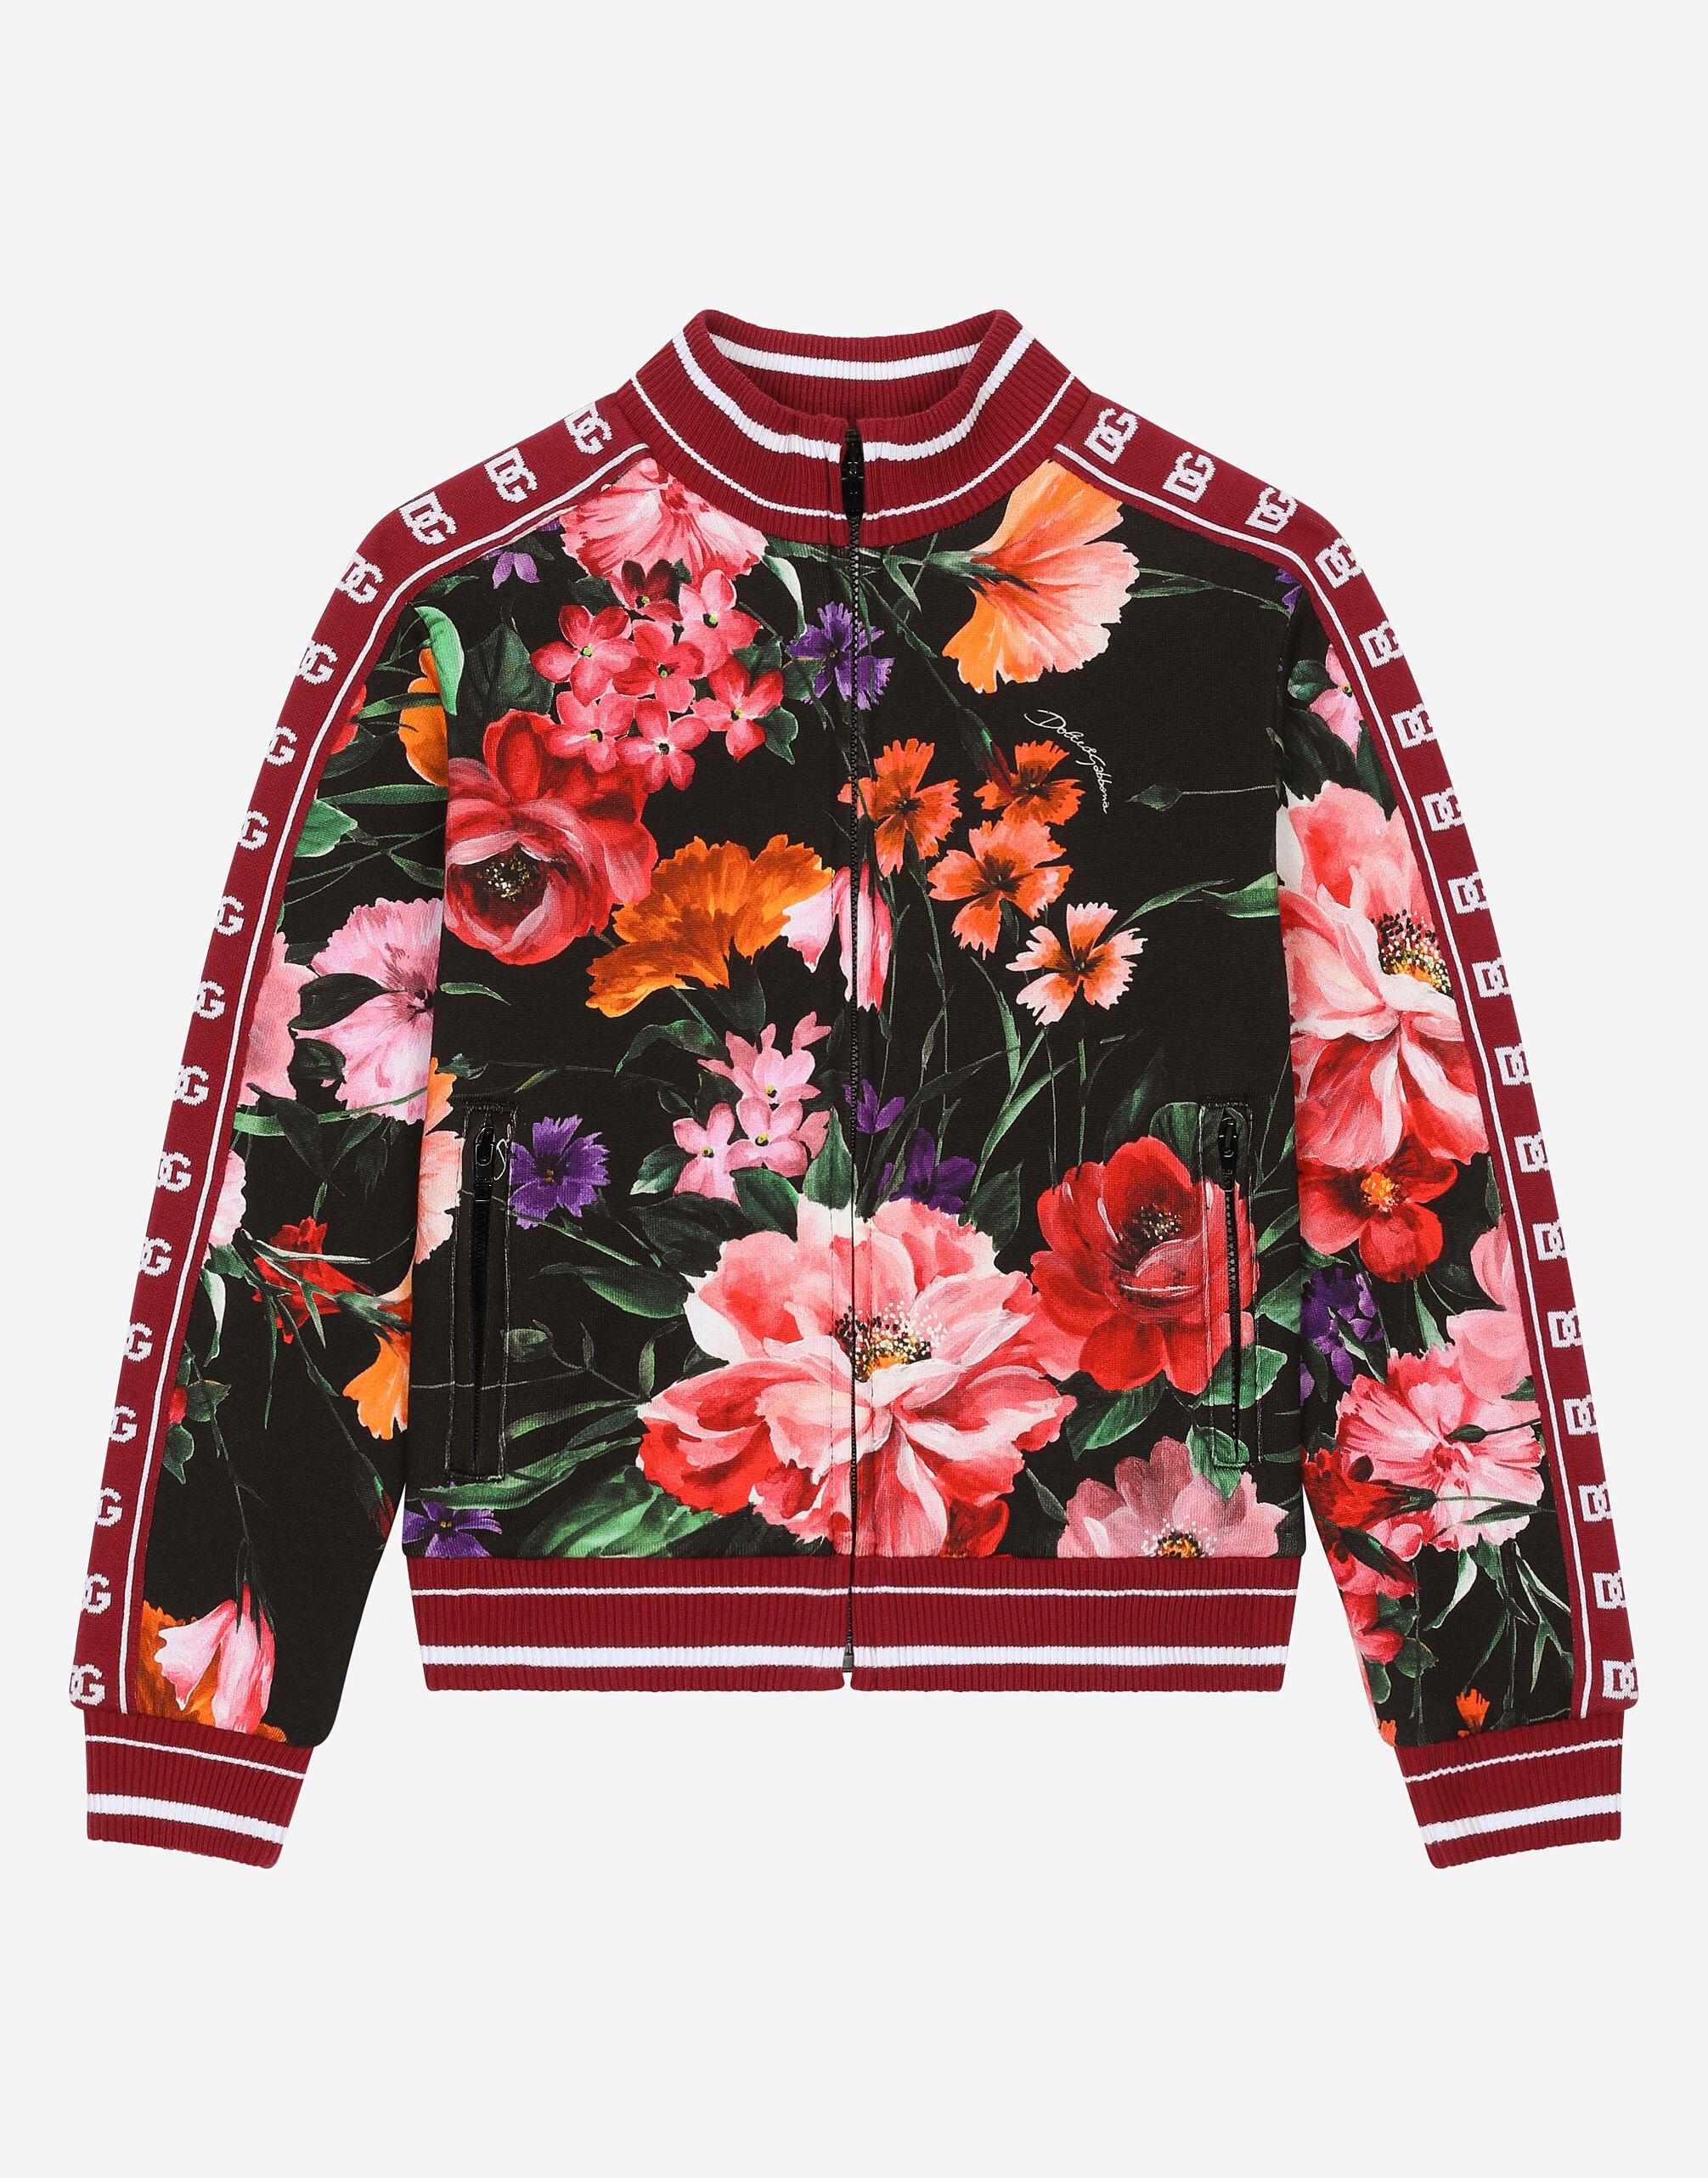 ${brand} Jersey sweatshirt with floral print over a black background ${colorDescription} ${masterID}